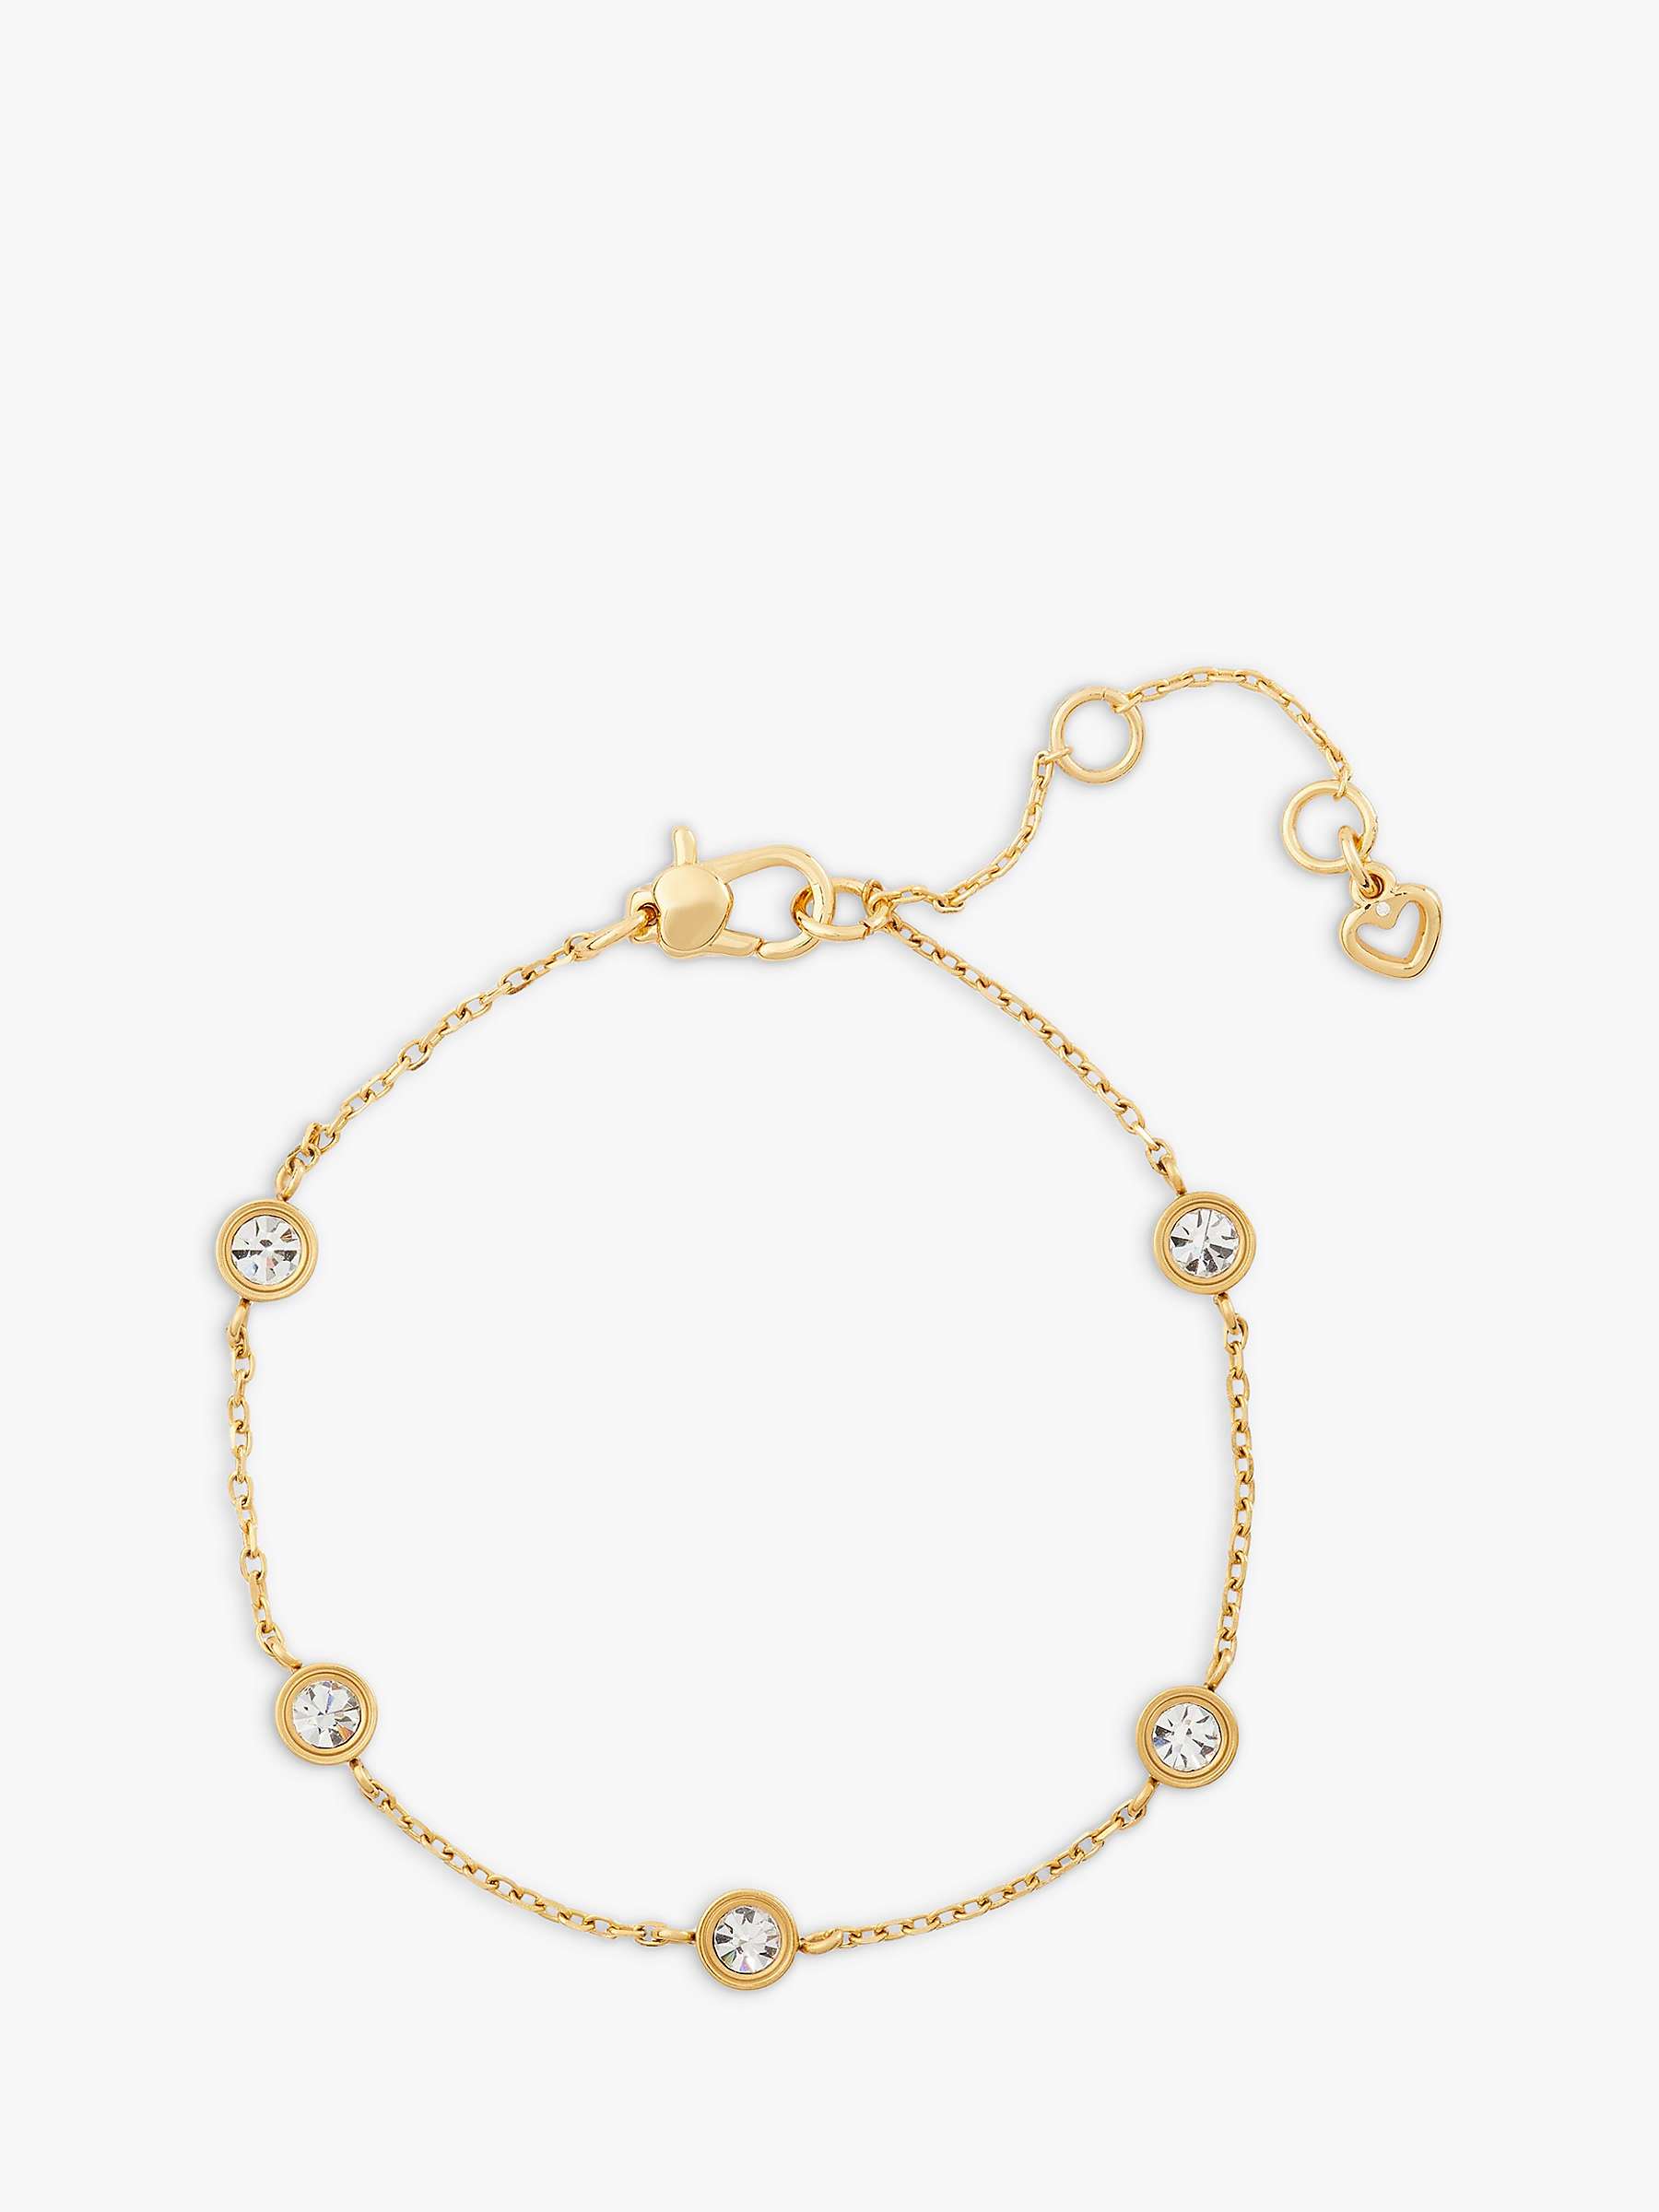 Buy kate spade new york Cubic Zirconia Charm Bracelet, Gold/Clear Online at johnlewis.com